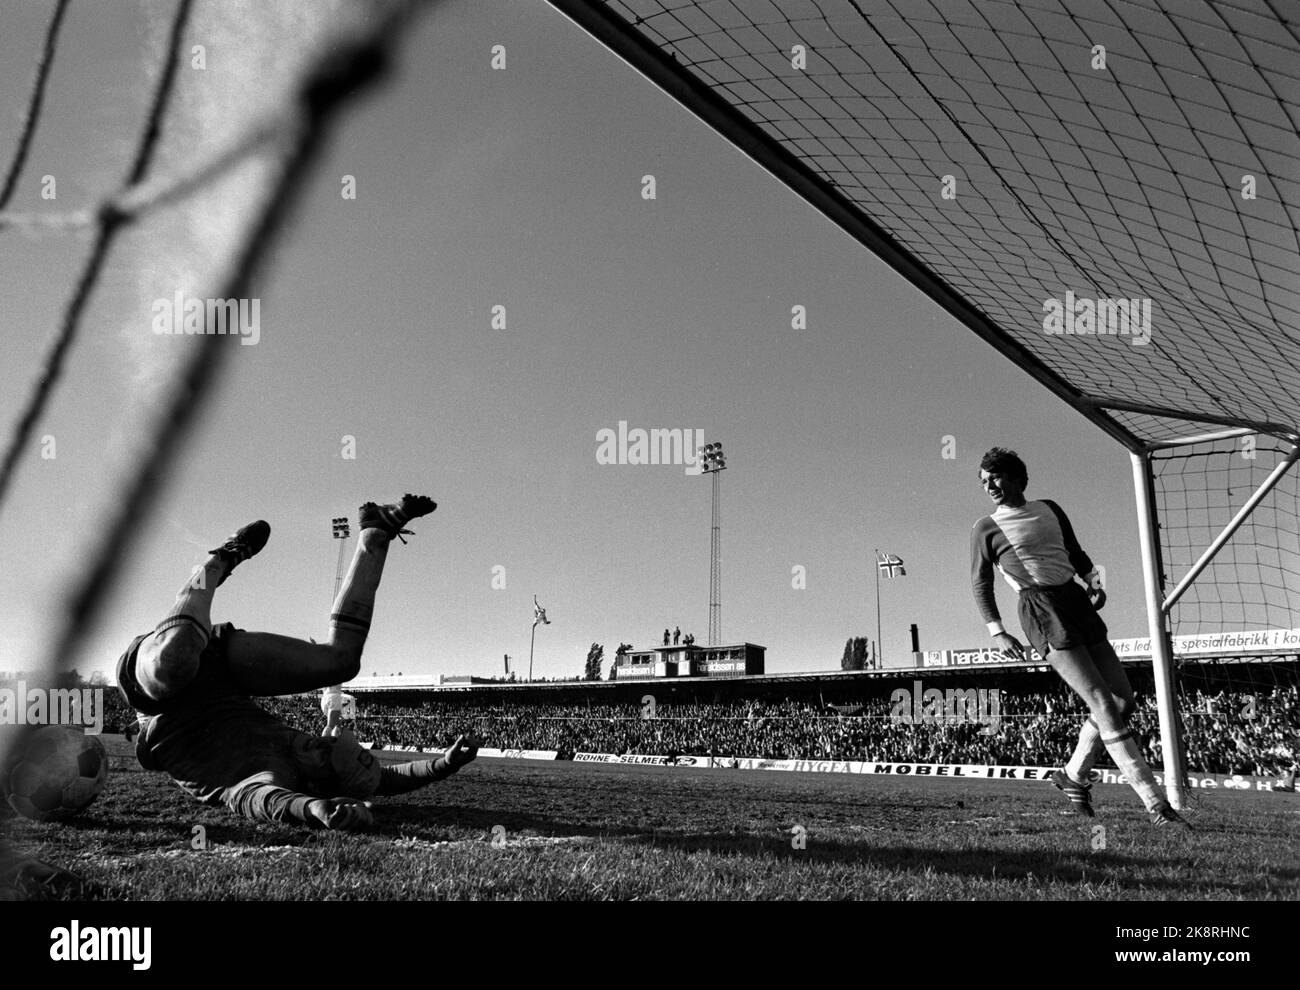 Aaserud borretzen current ntb soccer action keepers Black and White Stock  Photos & Images - Alamy